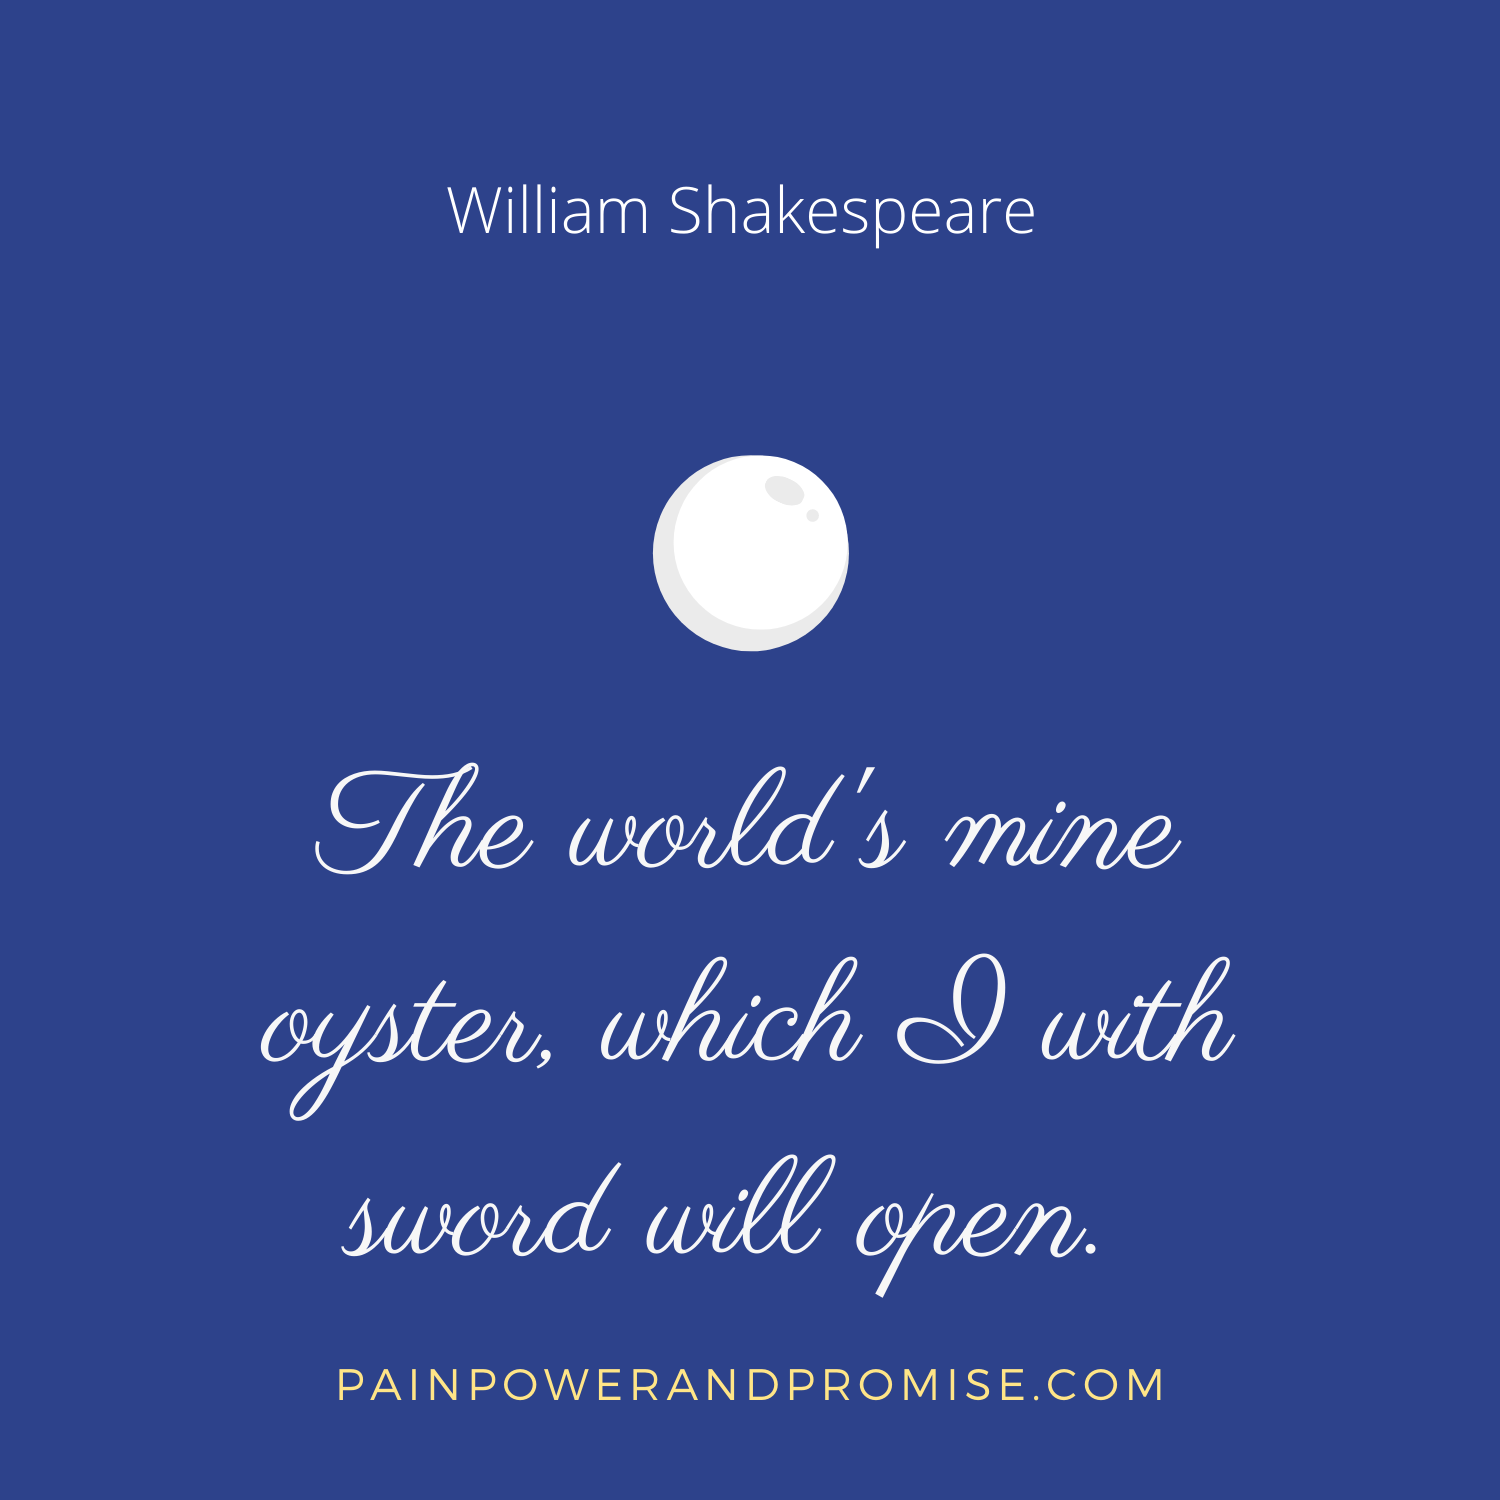 Inspirtional Quote: The world's mine oyster, which I with sword will open.